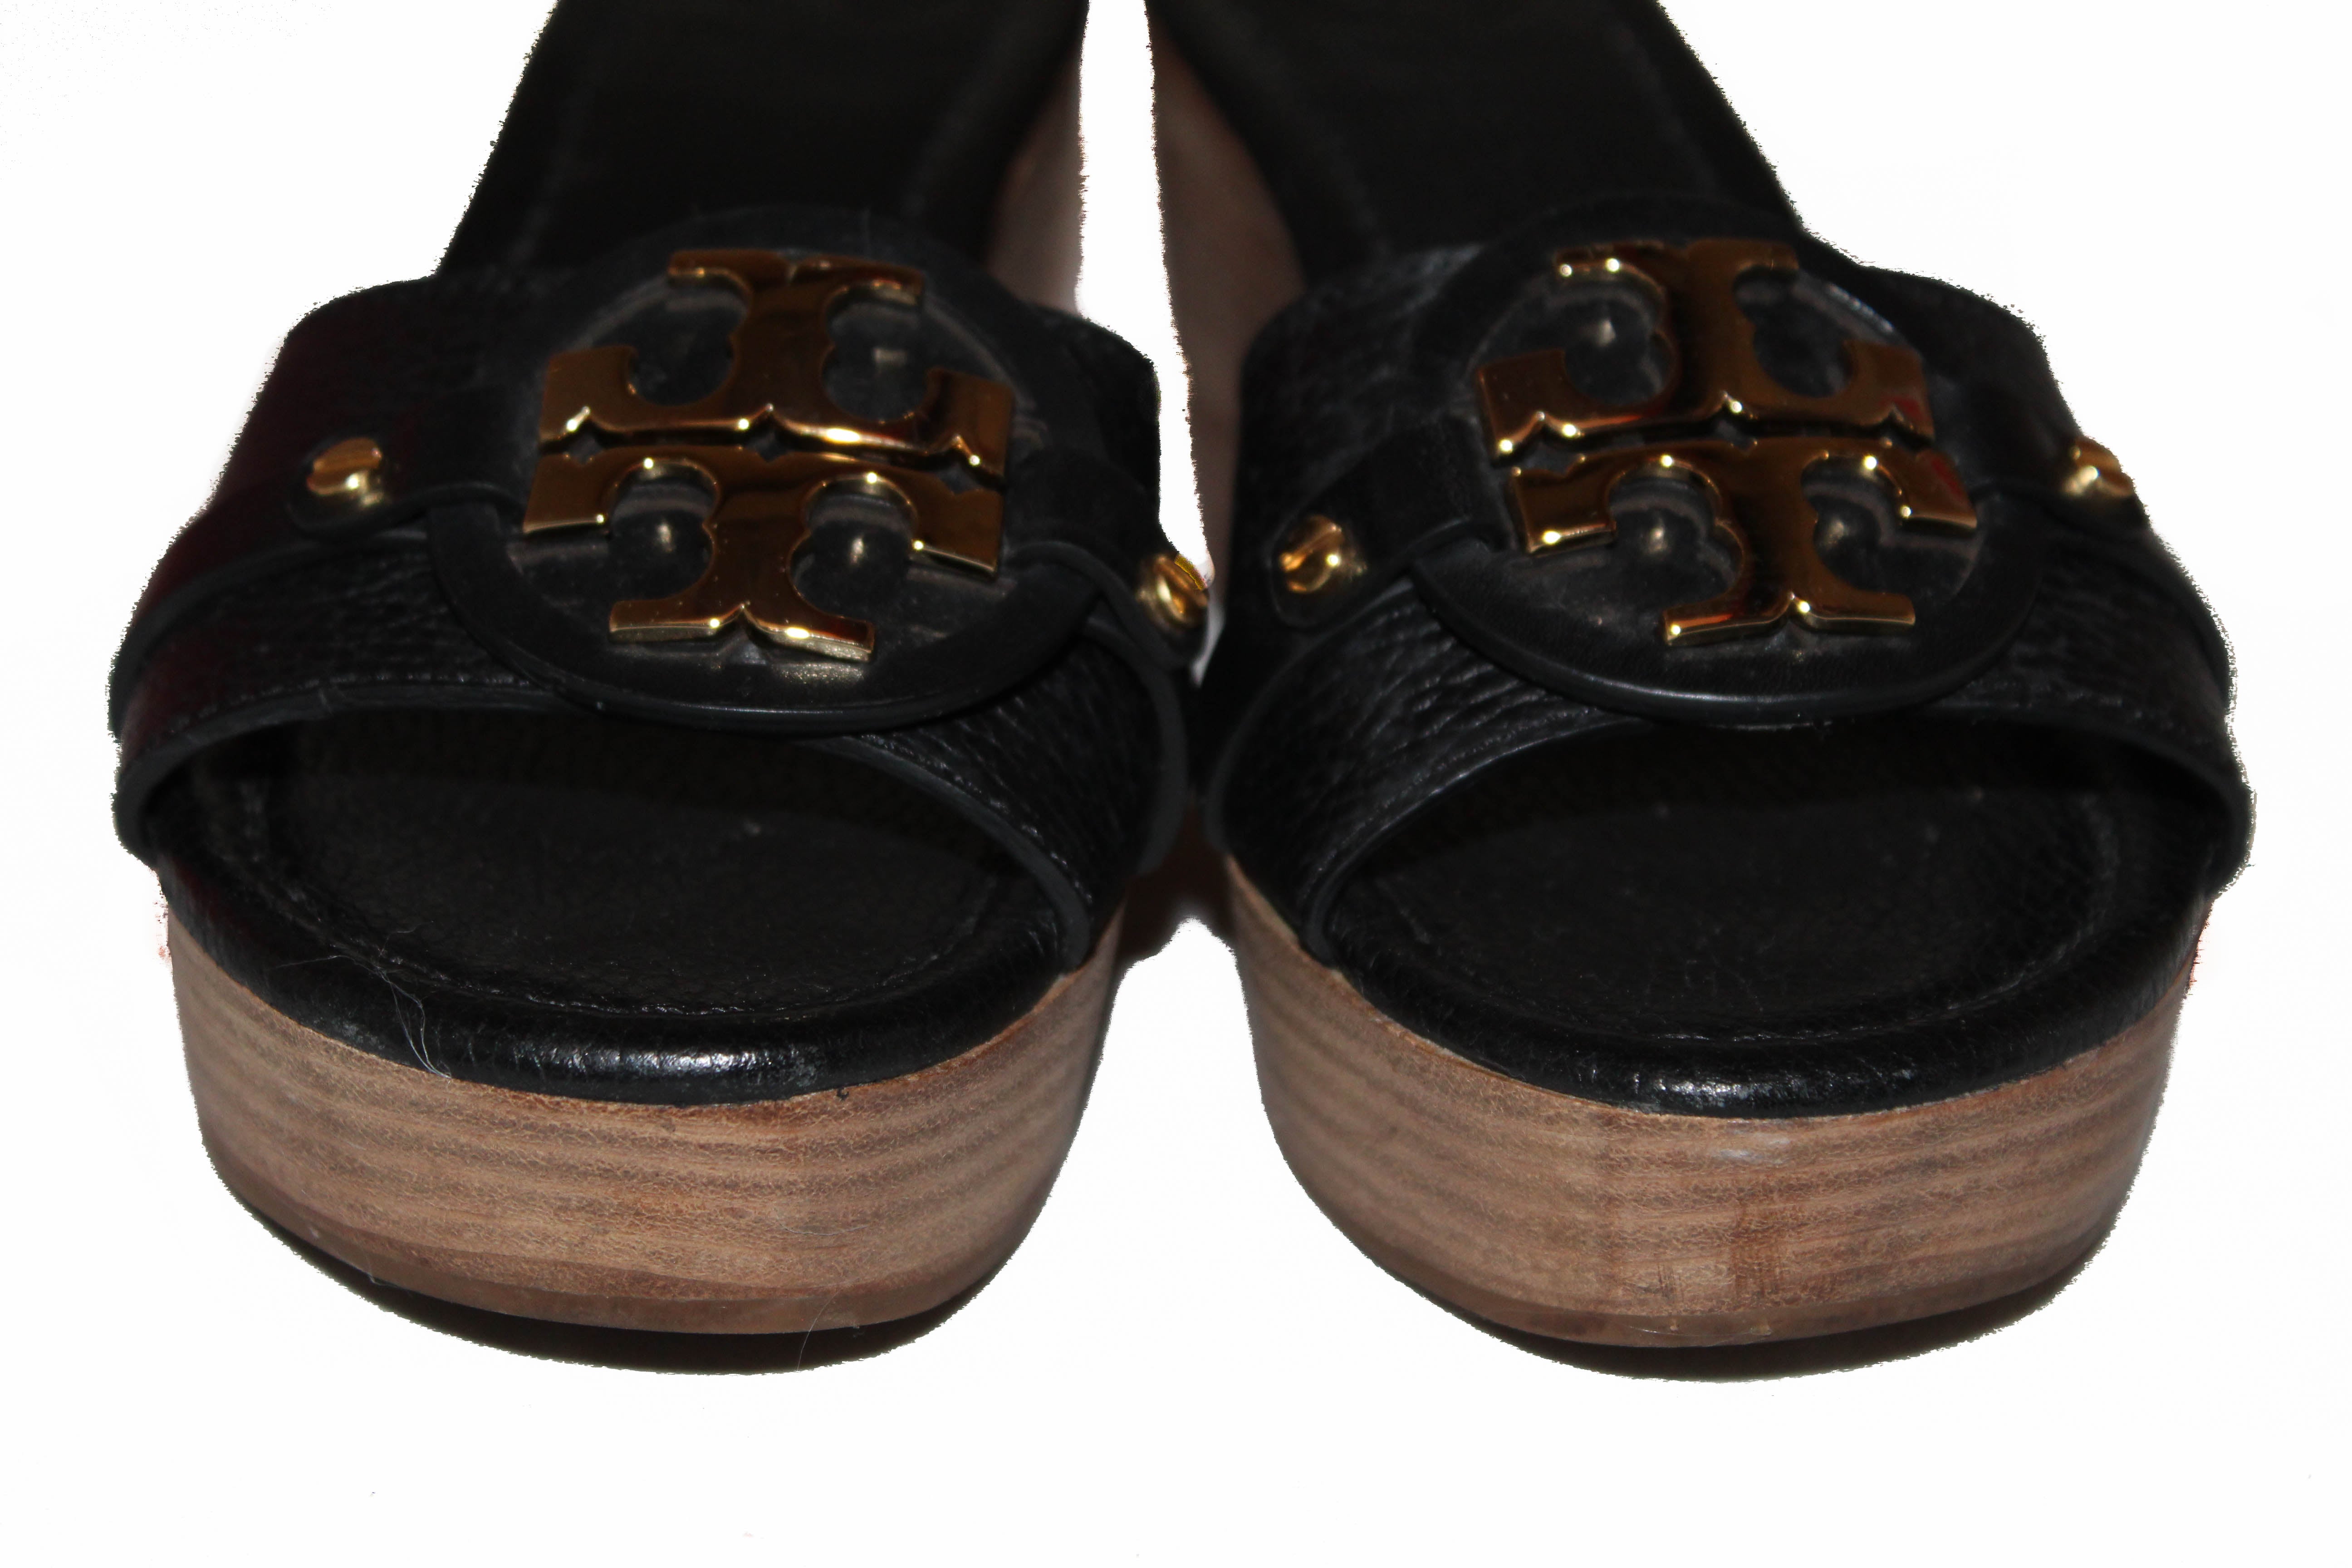 Authentic Tory Burch Black Wedge Sandal Size 6.5M